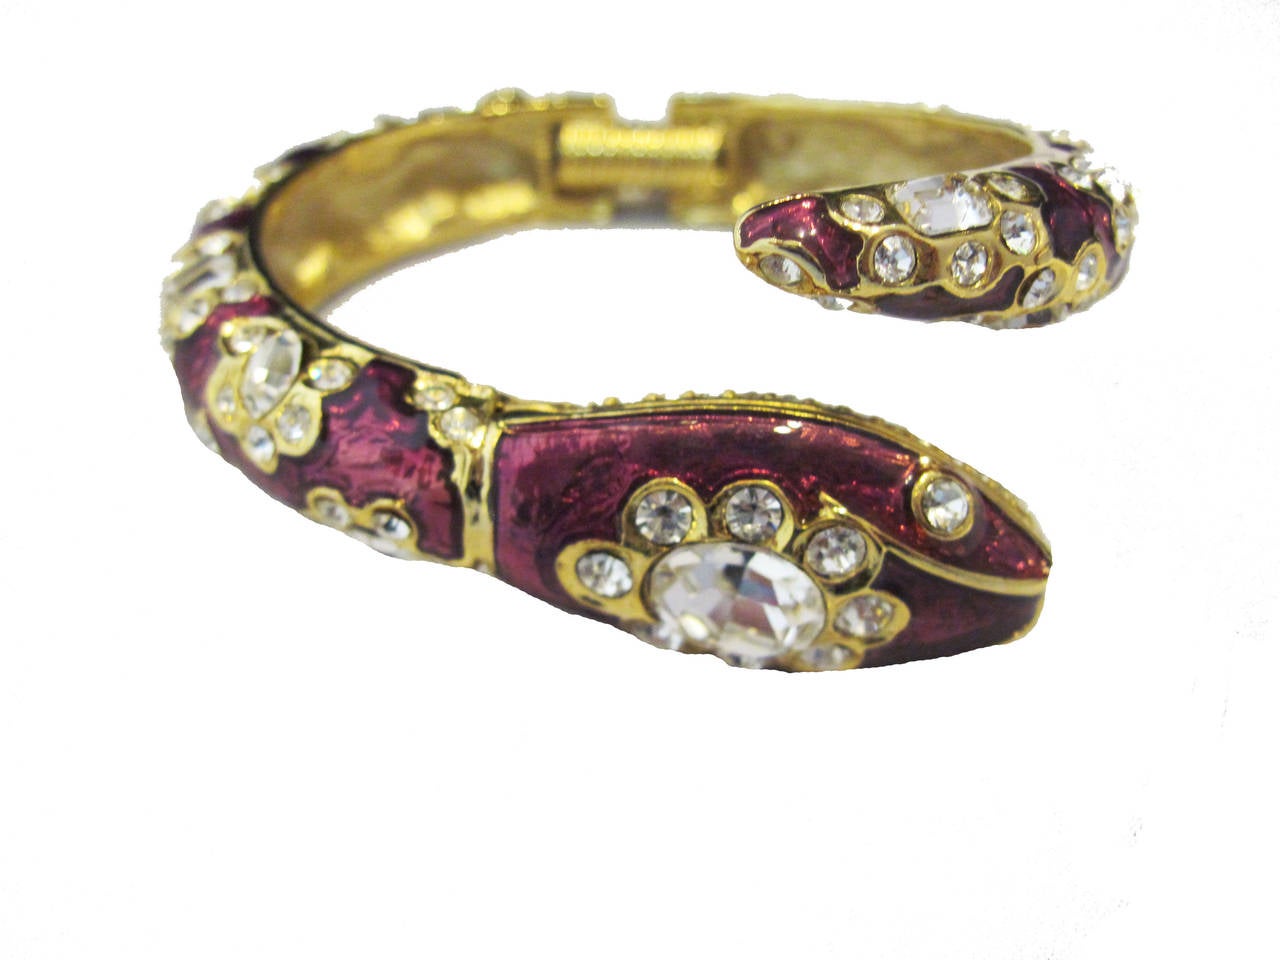 This is not a fierce snake bracelet. In fact, its colors clearly let you know it’s a beautiful snake bracelet with amethyst purple enameling features clear rhinestone stones that come in different shapes and sizes. Signed Kenneth Lane, this bracelet